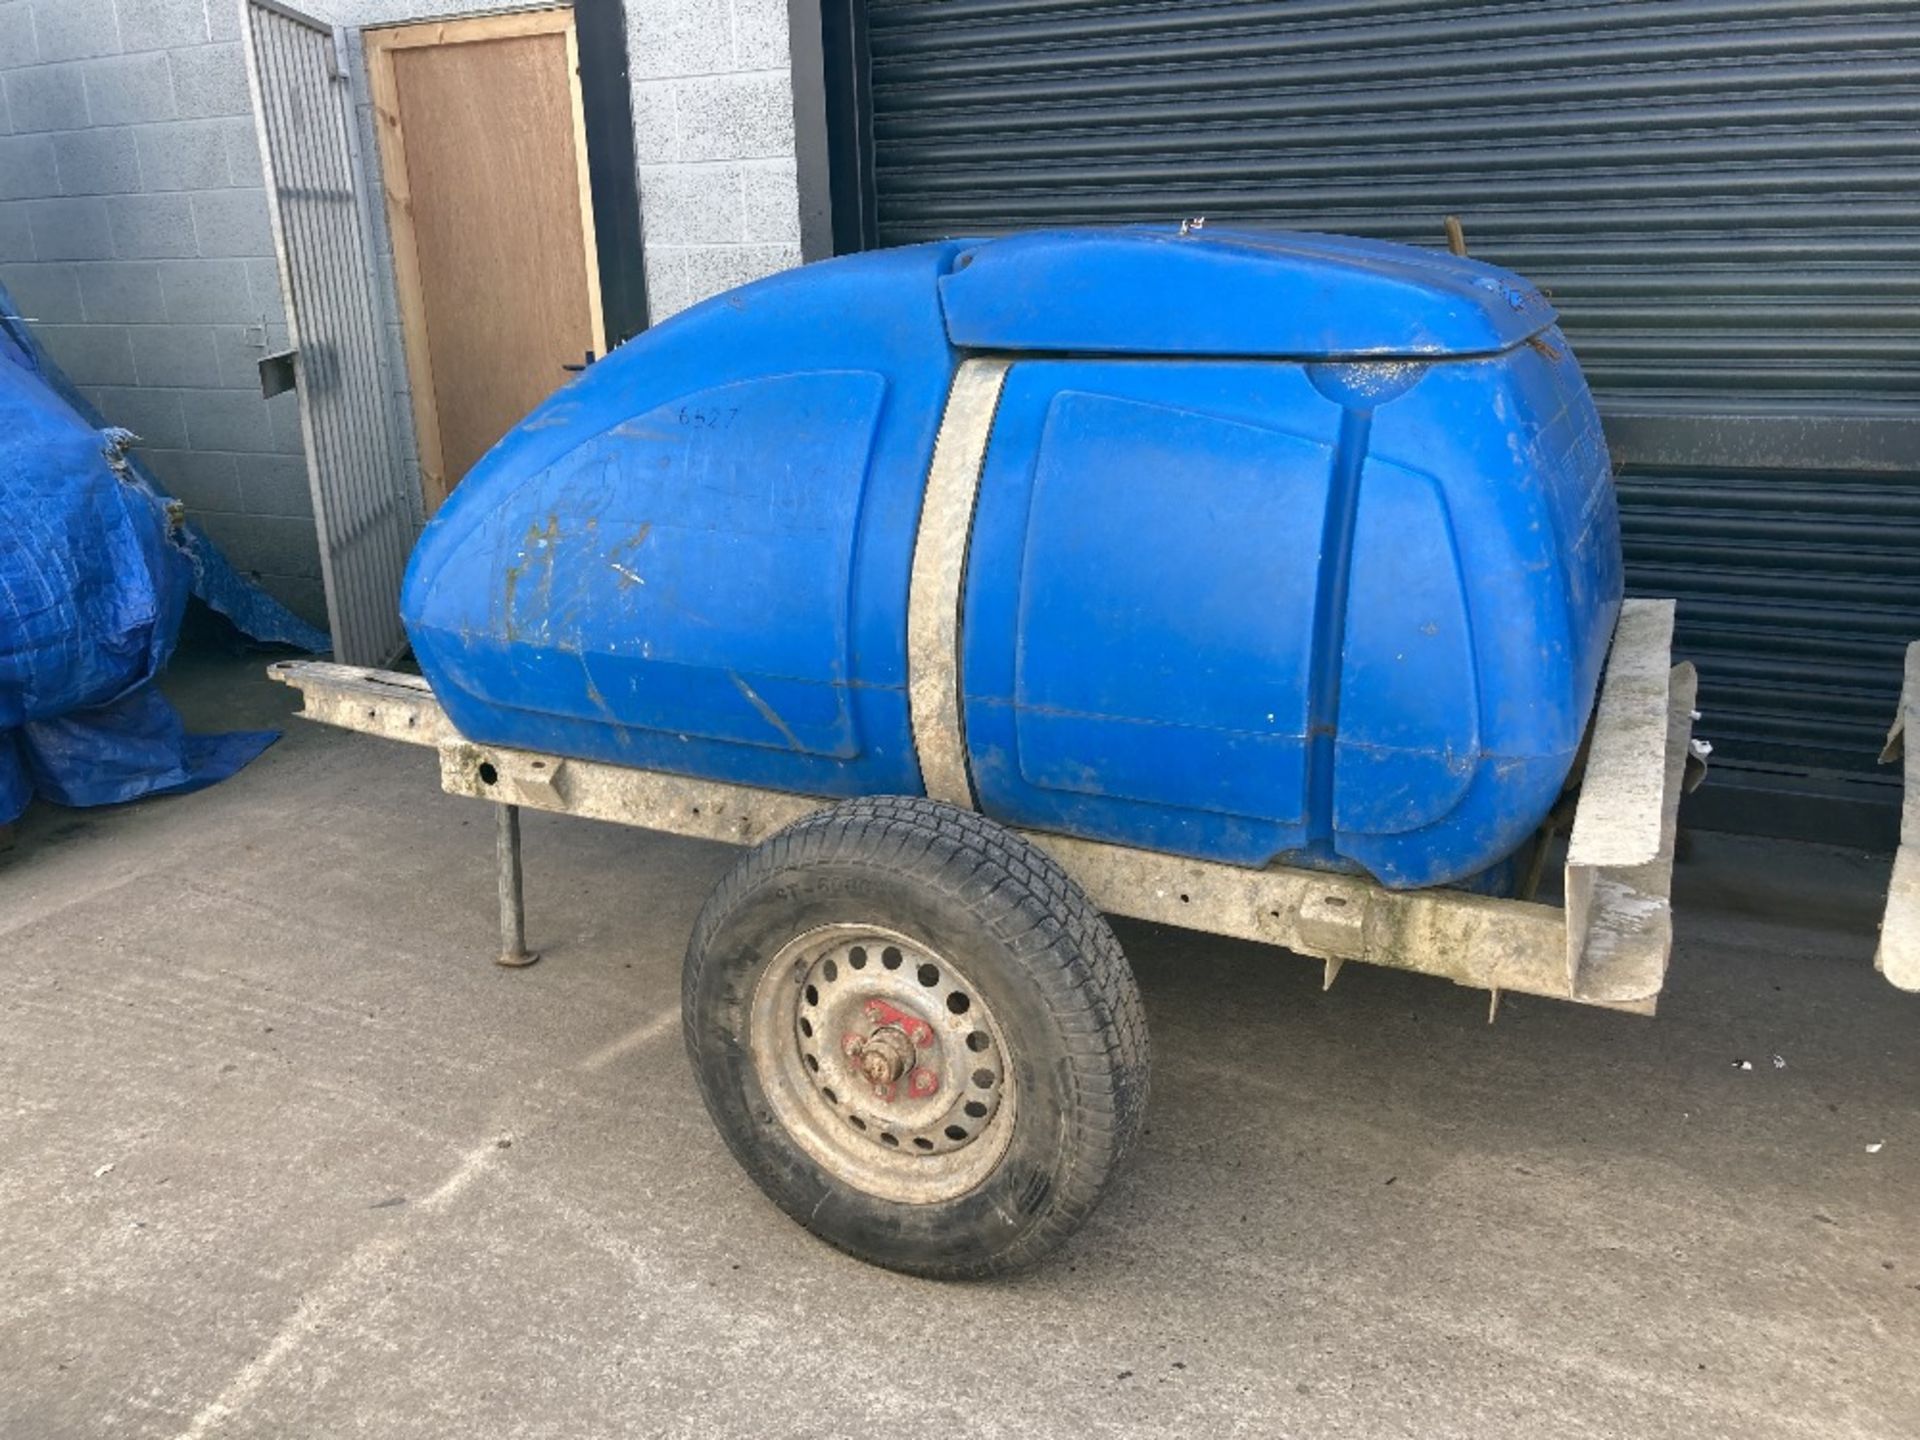 Western Tanks 1,000ltr Water Bowser